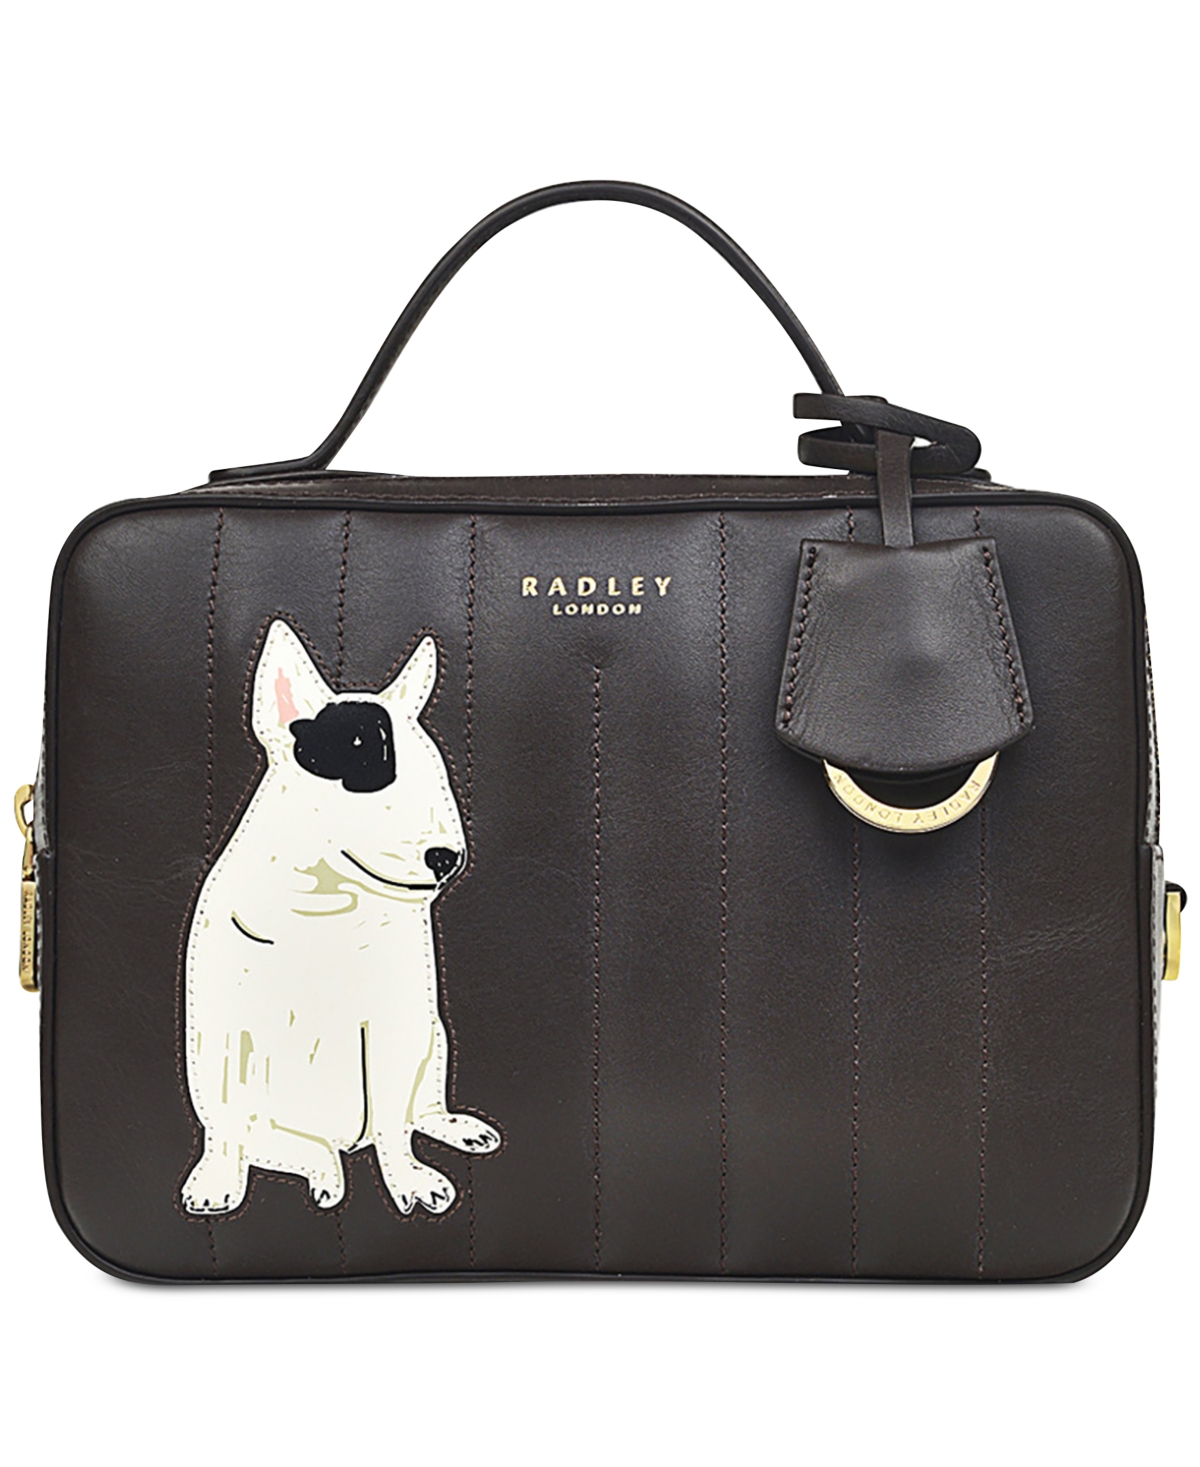 Buy Radley London Radley And Friends Leather Cross-Body Bag from